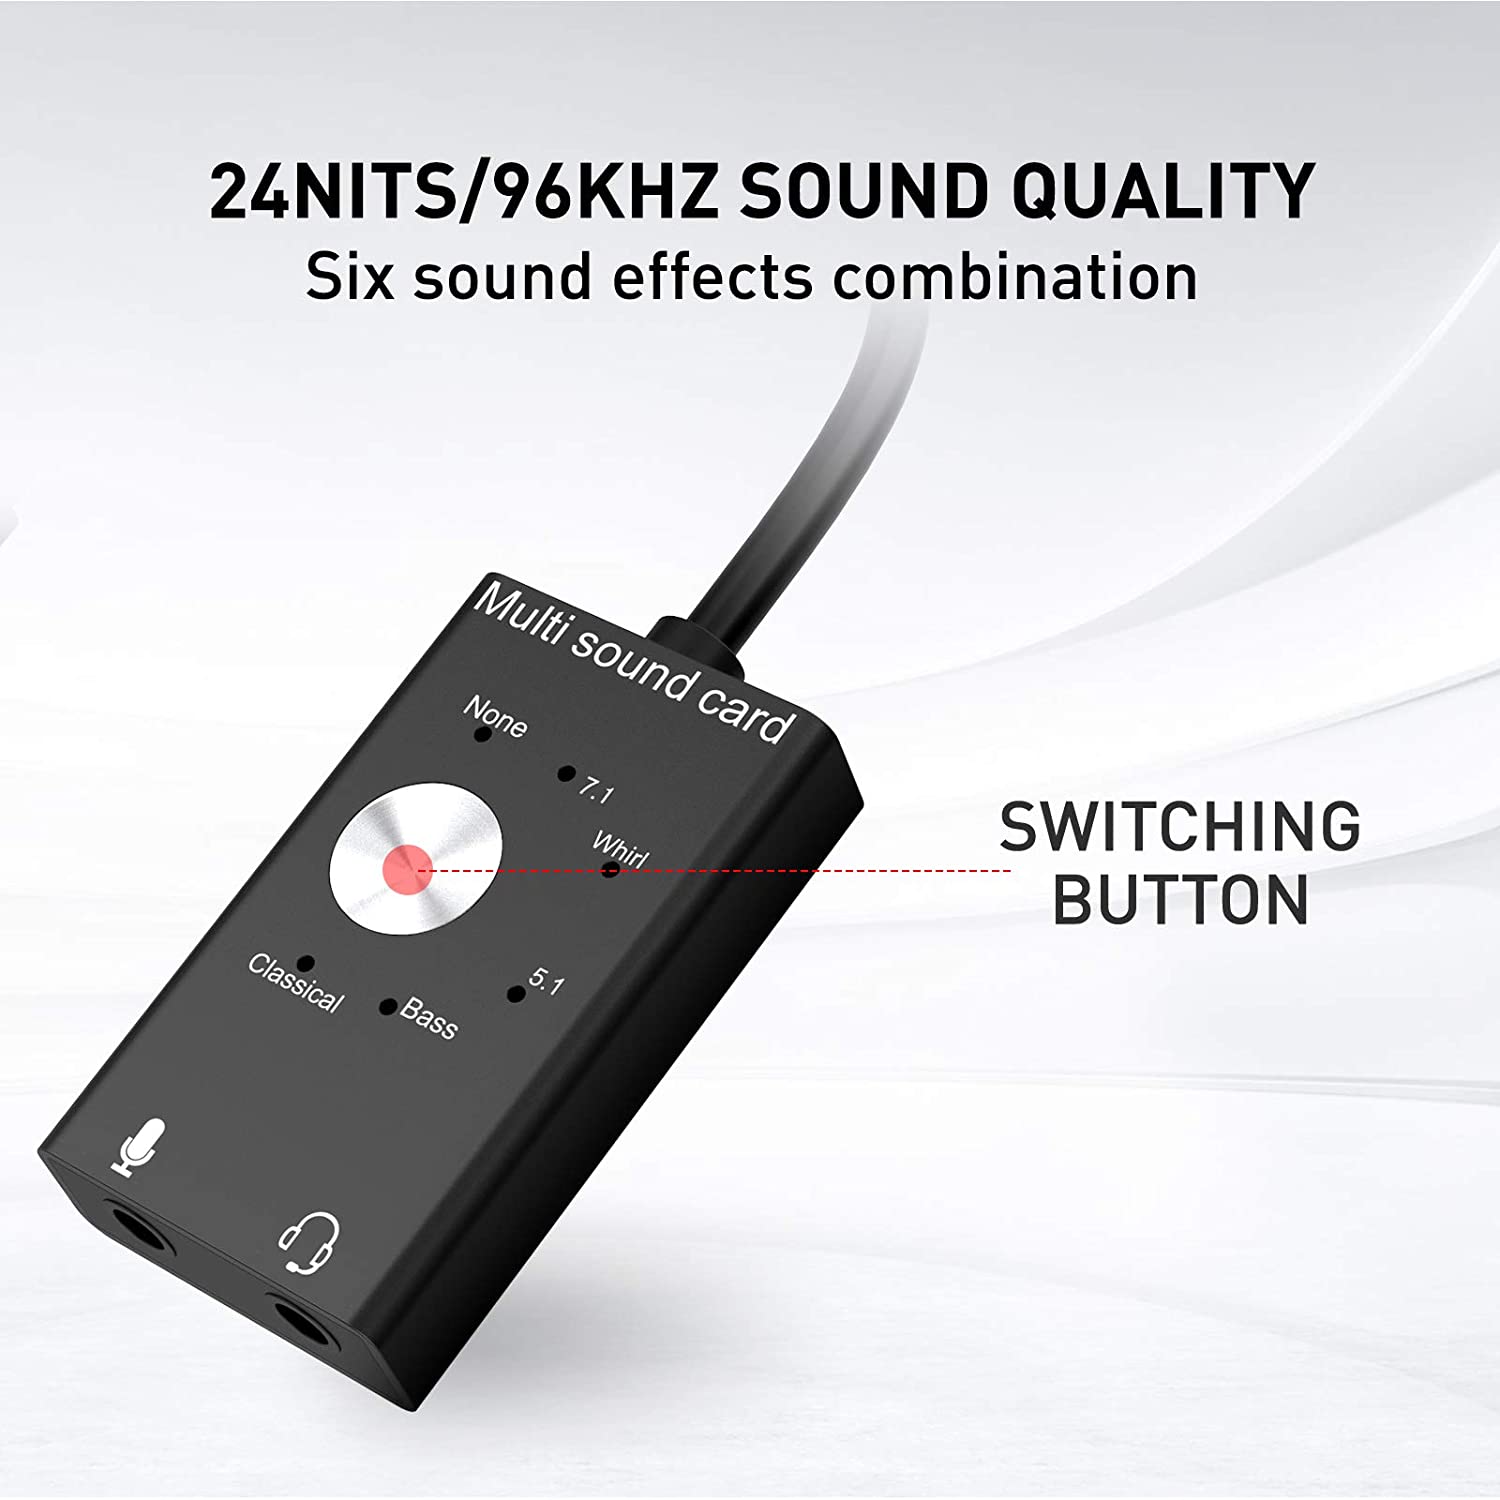 HAVIT HV-SD1039 Audio Adapter External USB Sound Card with 3.5mm Headphone and Microphone Jack